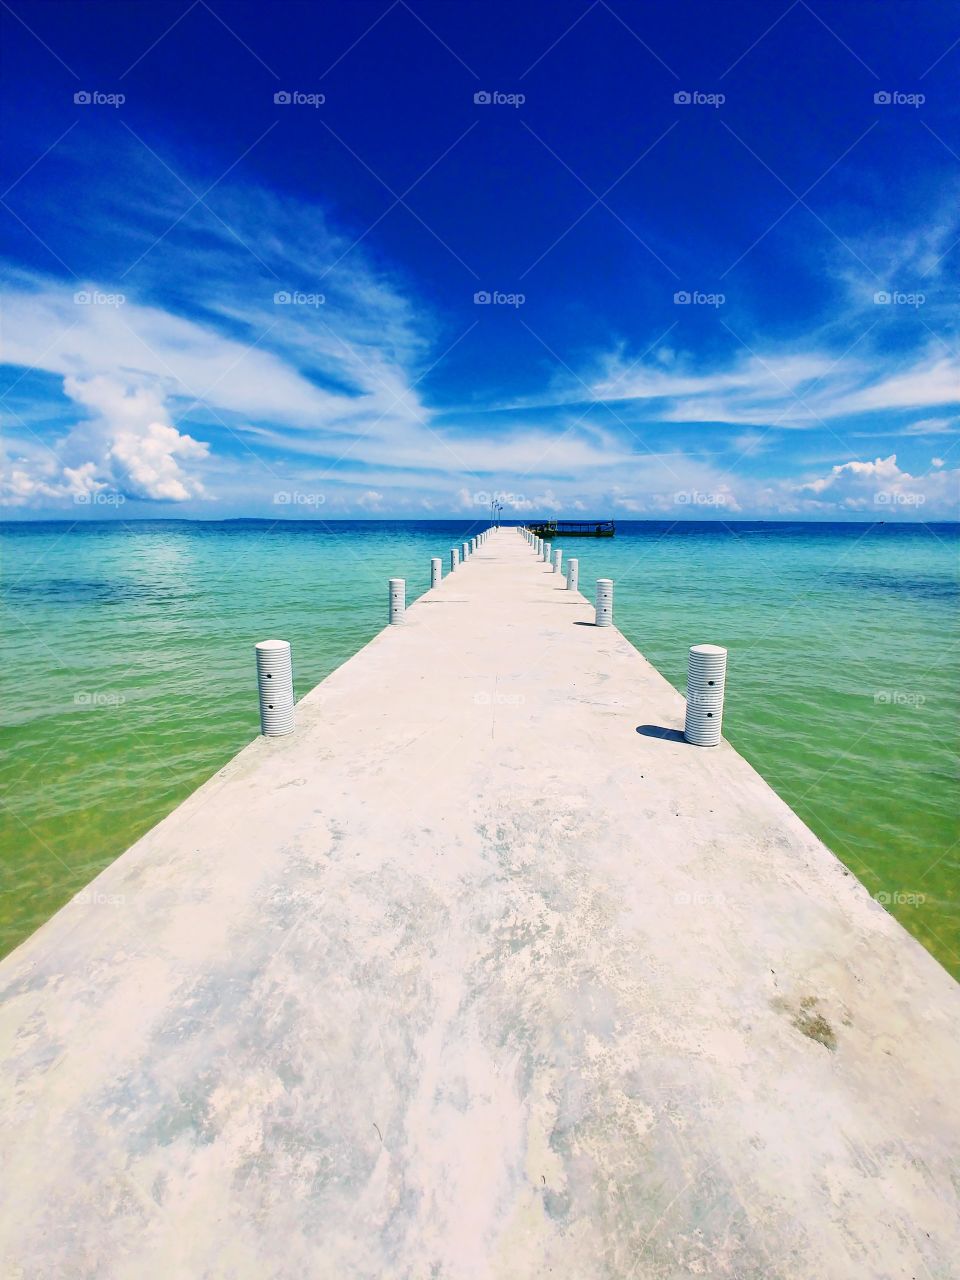 The view of the main pier on Koh Rong island in Cambodia